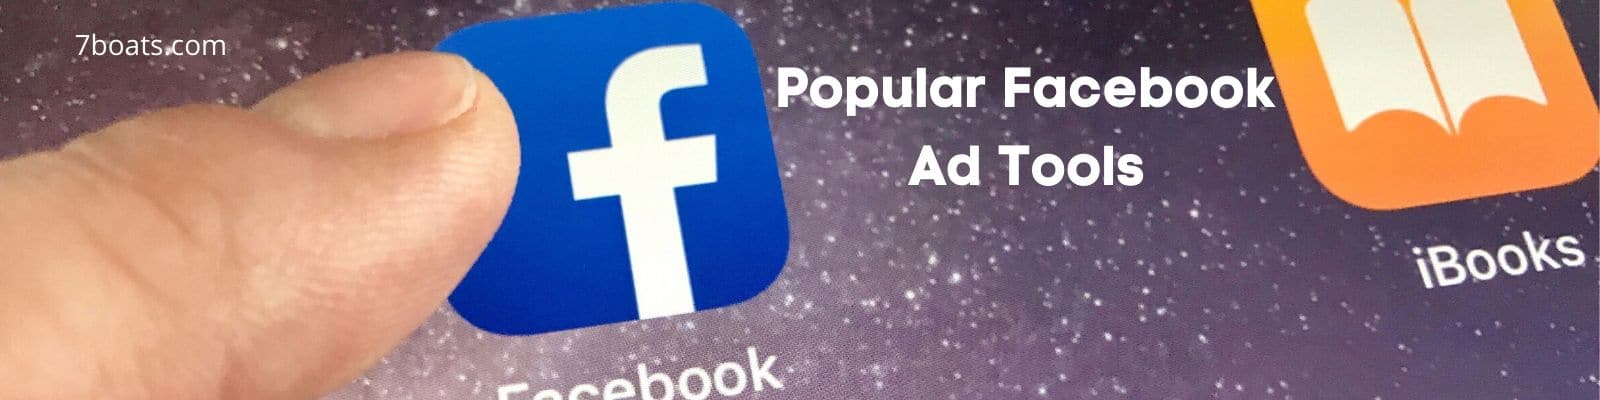 Widely Used Facebook Advertisement Tools That Help Businesses Improve ROI